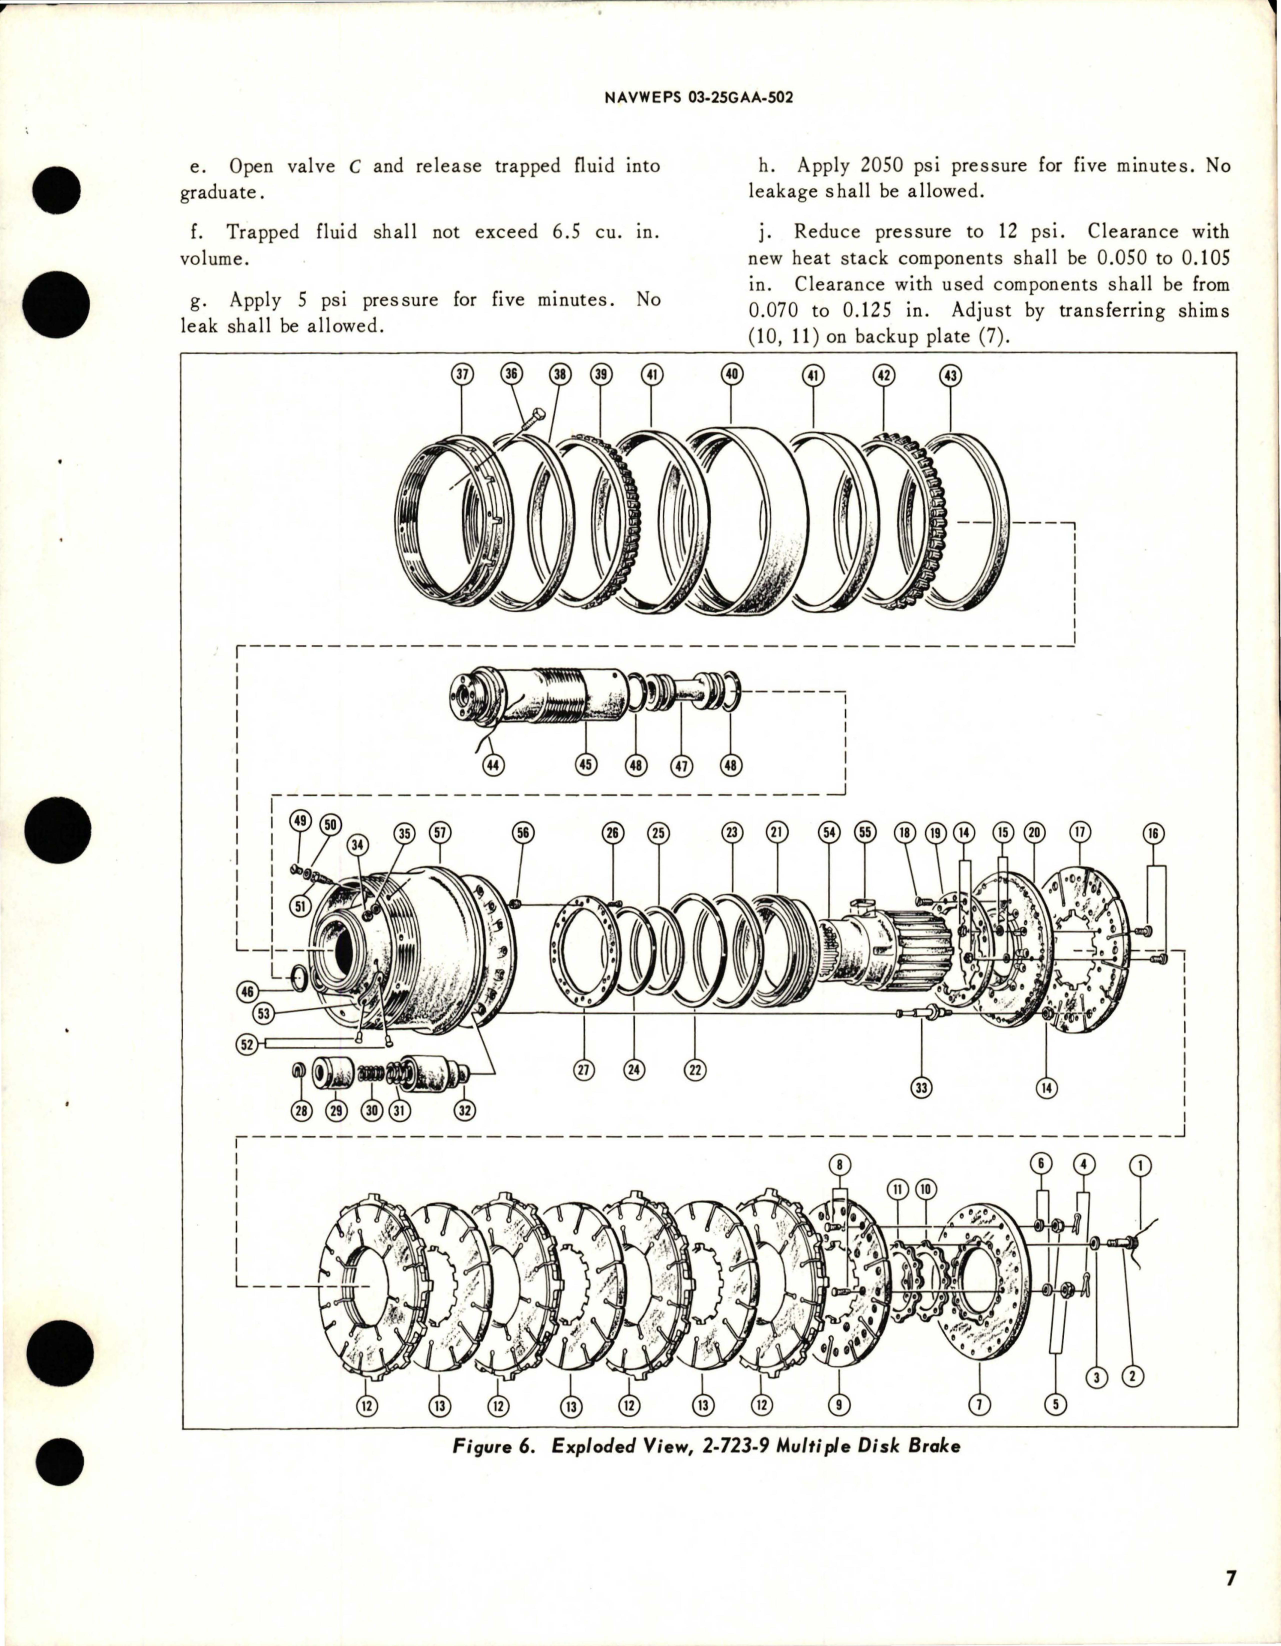 Sample page 7 from AirCorps Library document: Operation, Service and Overhaul Instructions with Illustrated Parts Breakdown for Multiple Disk Brake - Stock RH1630-776-5962-XGDC - Part 2-723-9